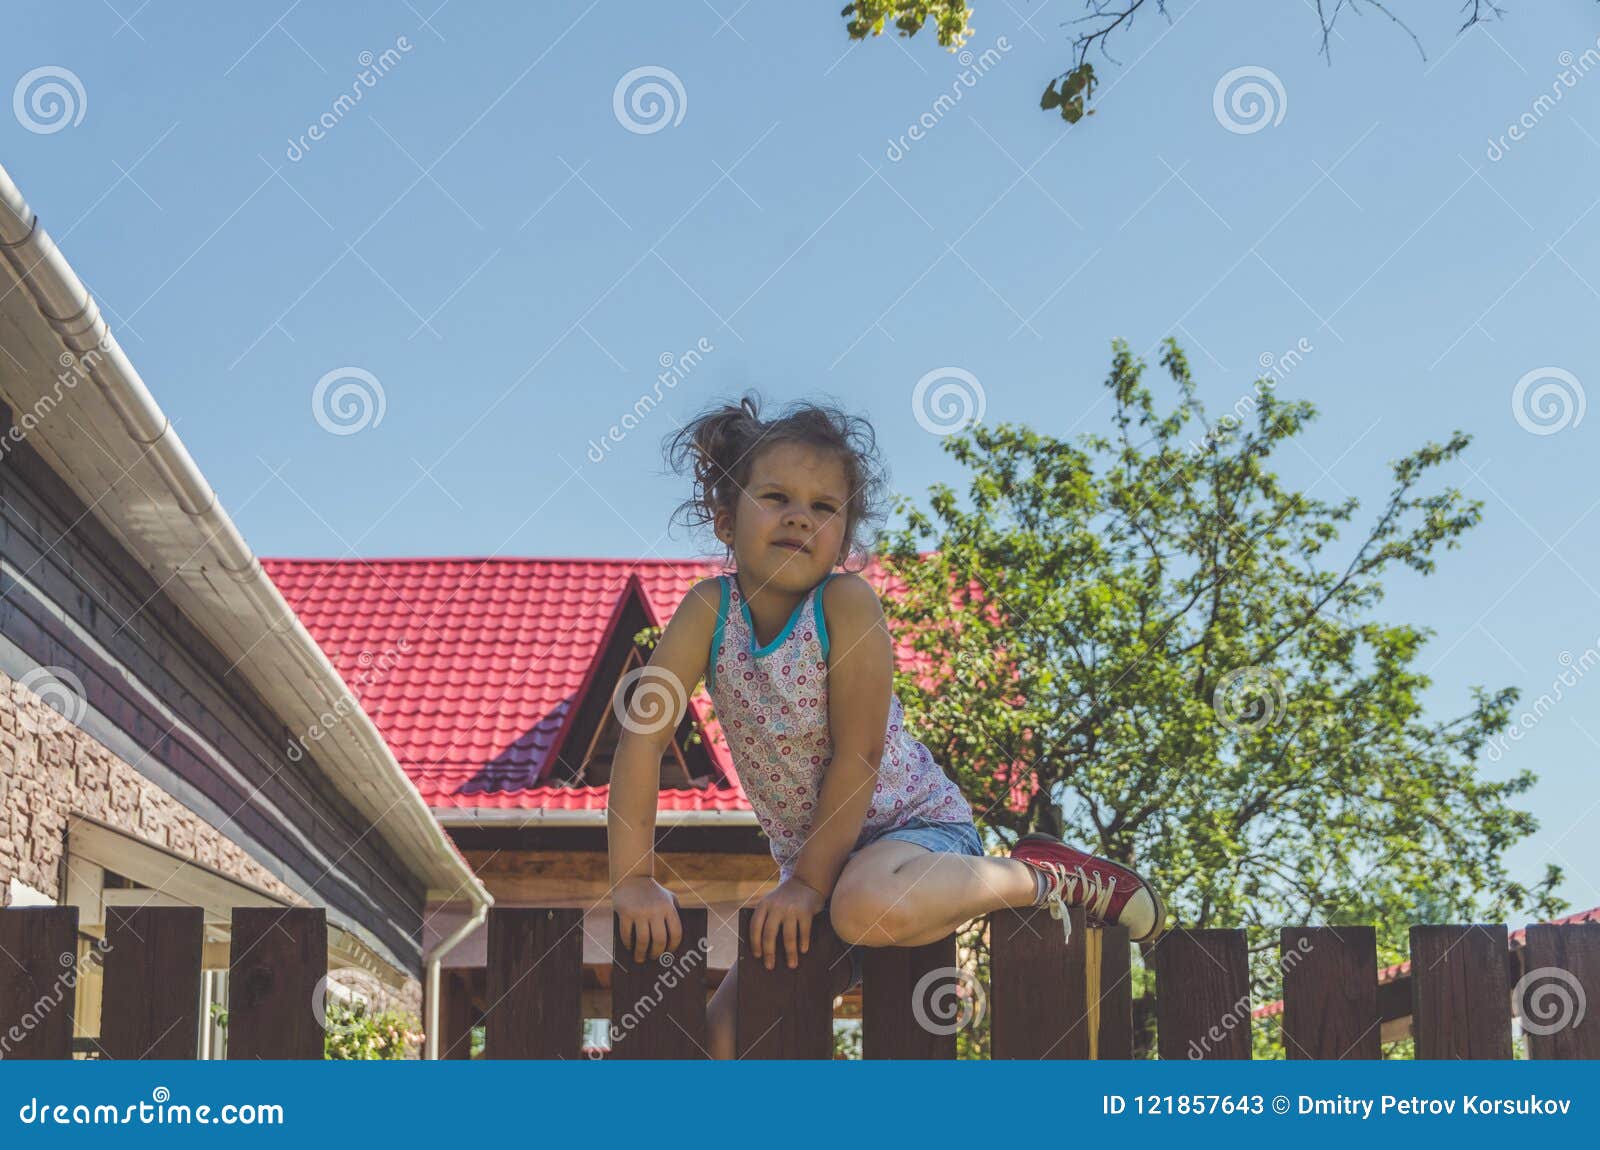 Girl Climbs The Fence On A Summer Day Stock Image Image Of Looking